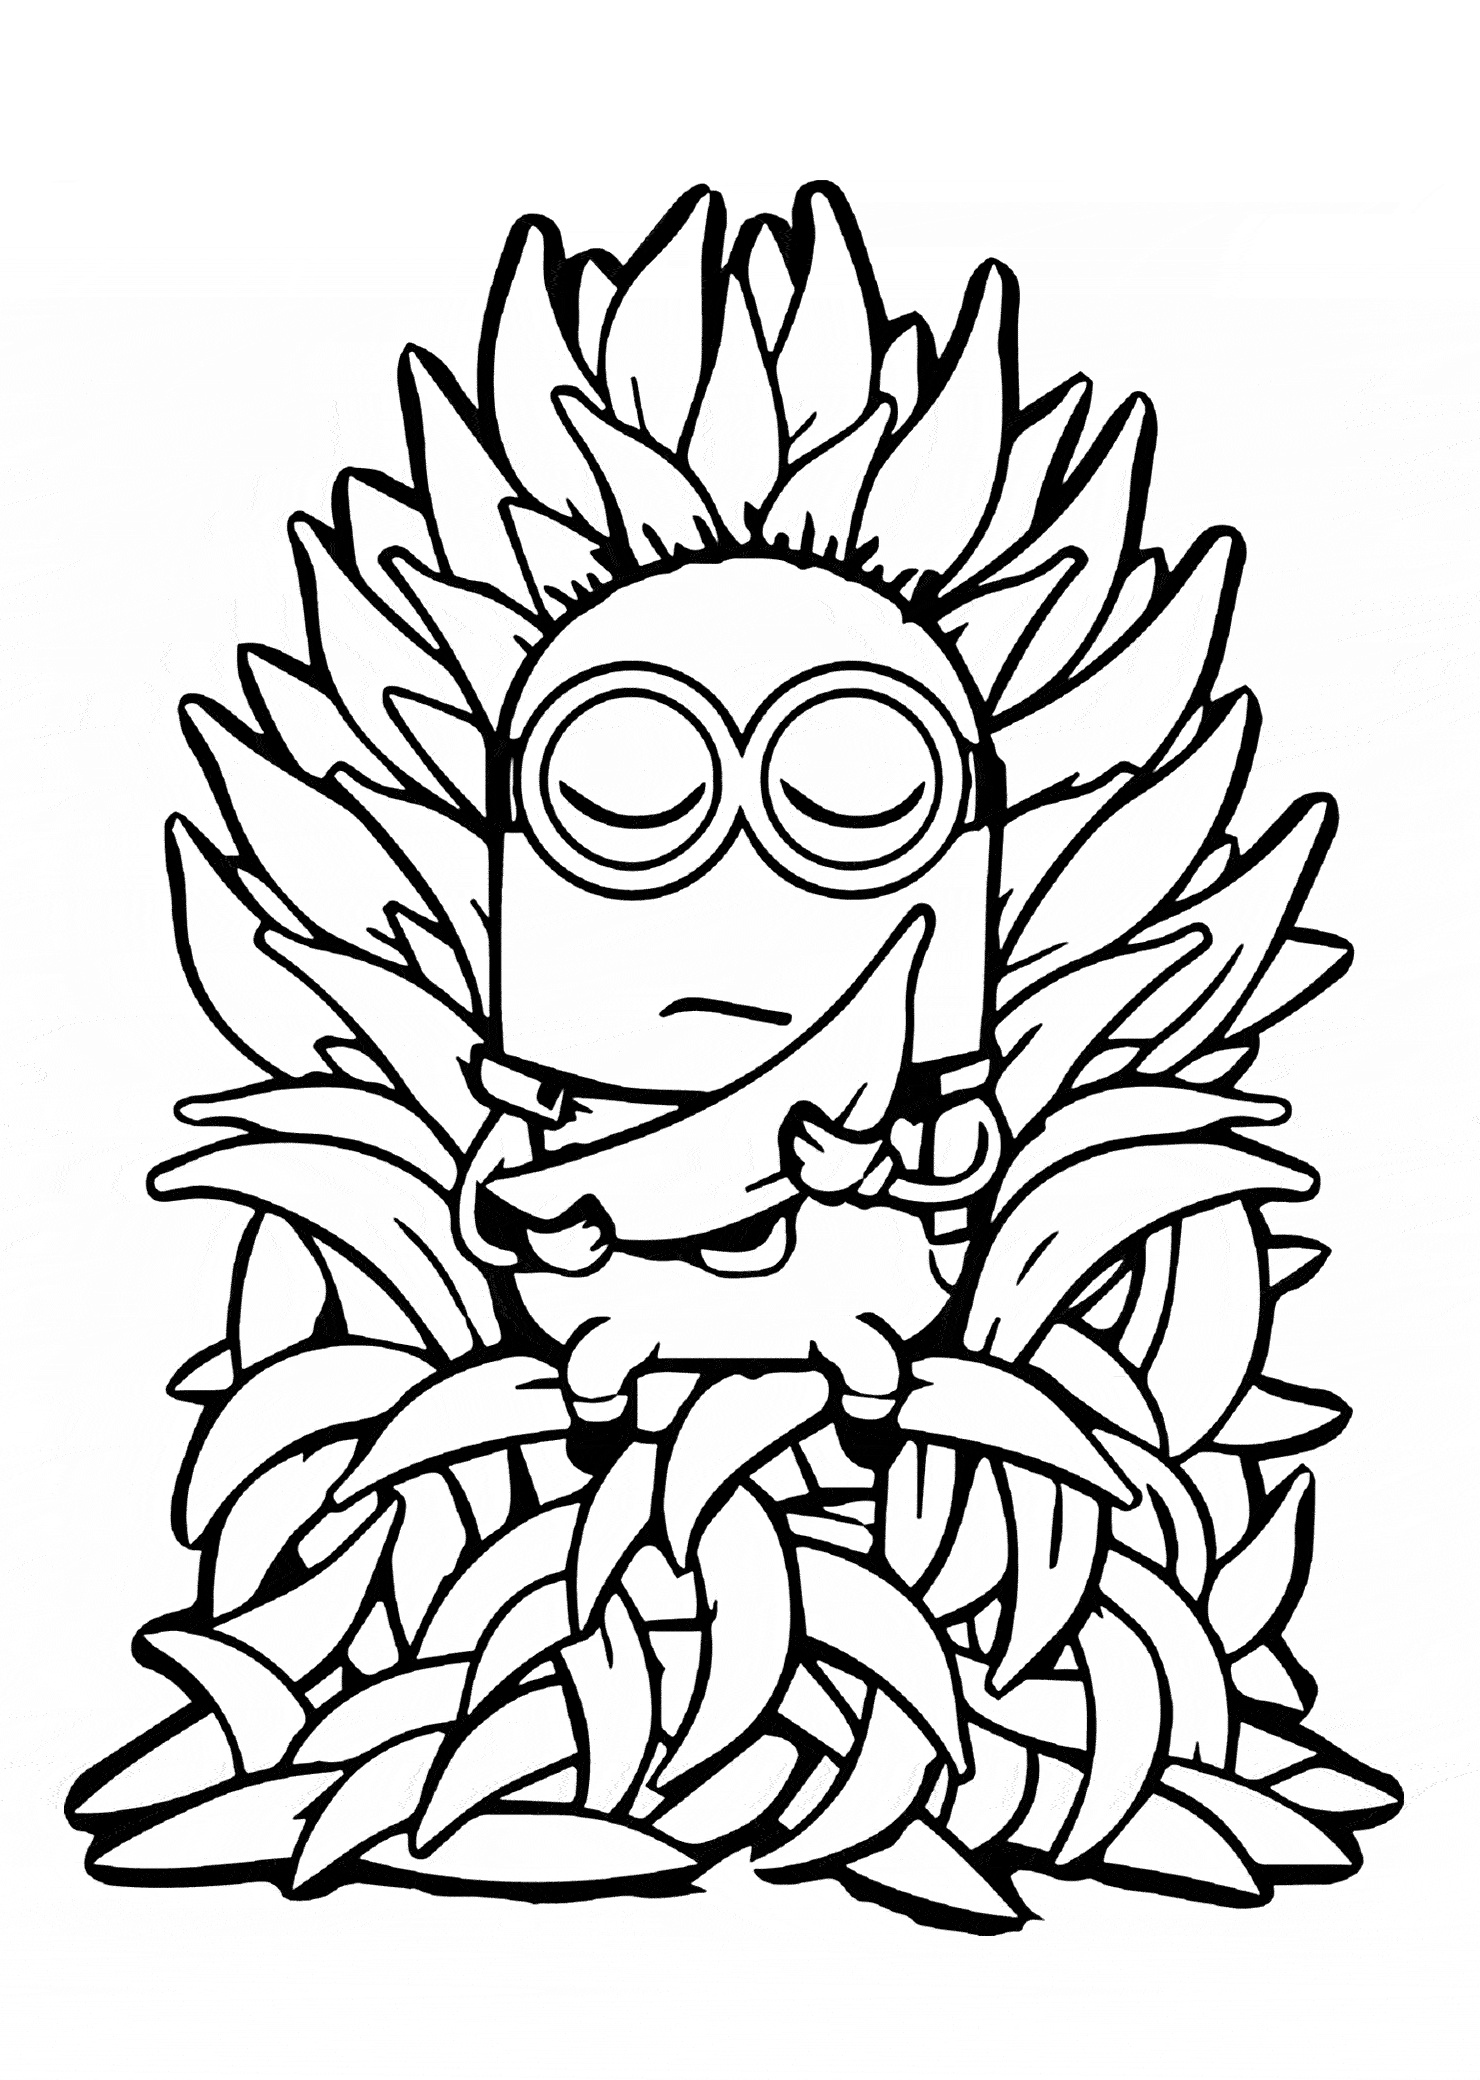 Coloriages Minions Cool Images Minions for Children Minions Kids Coloring Pages